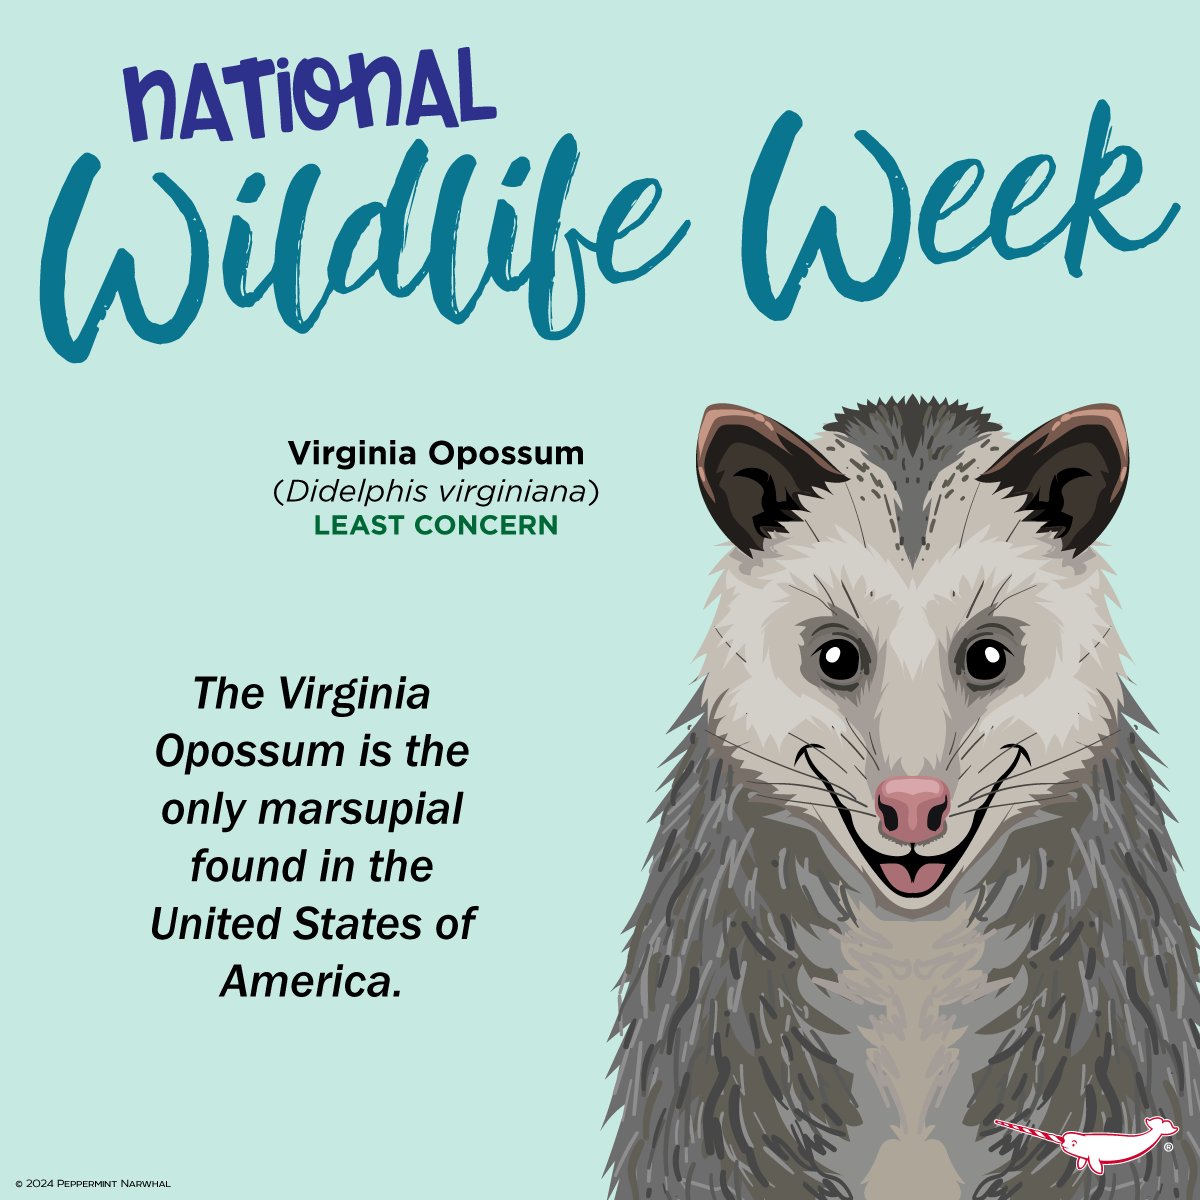 #NationalWildlifeWeek
#VirginiaOpossum is the only #marsupial in native to the USA.

American Animal Pins - including the #Opossum!
peppermintnarwhal.com/s/search?q=nor…

Shop #PeppermintNarwhal
peppermintnarwhal.com

#NationalWildlife #AmericanWildlifeWeek #AmericanWildlife